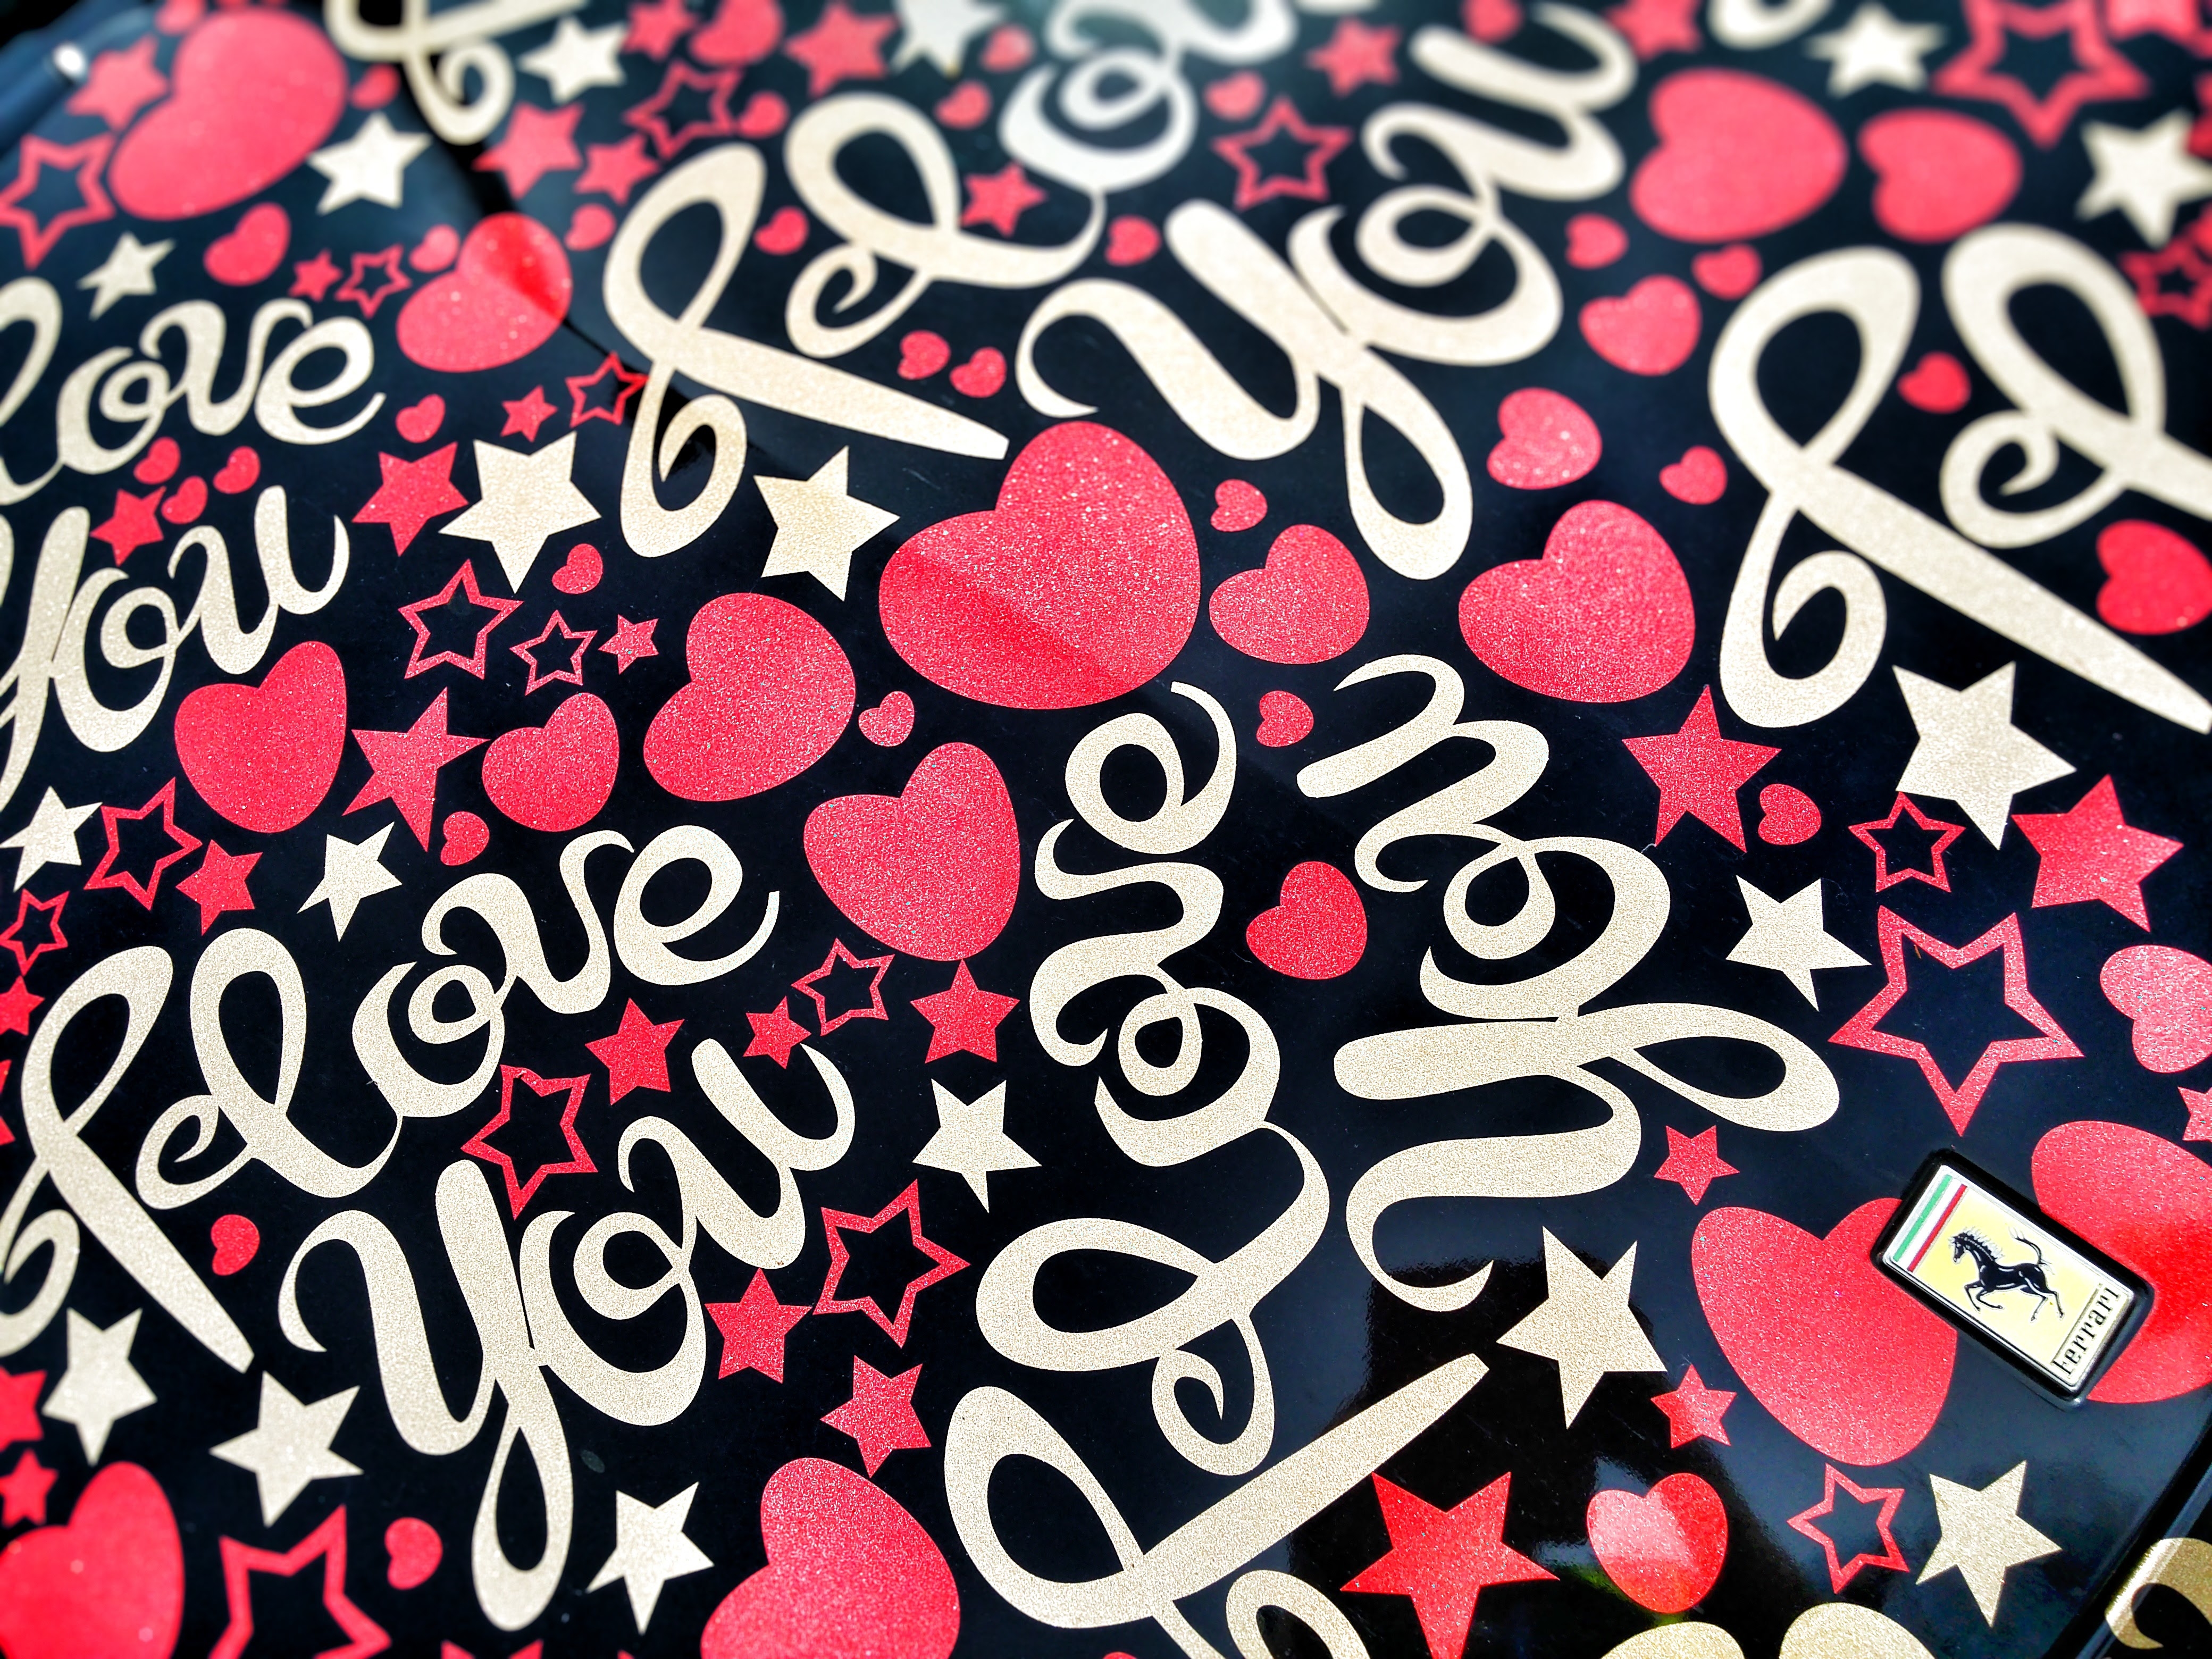 hearts, stars, love, words, paint, lettering, inscriptions